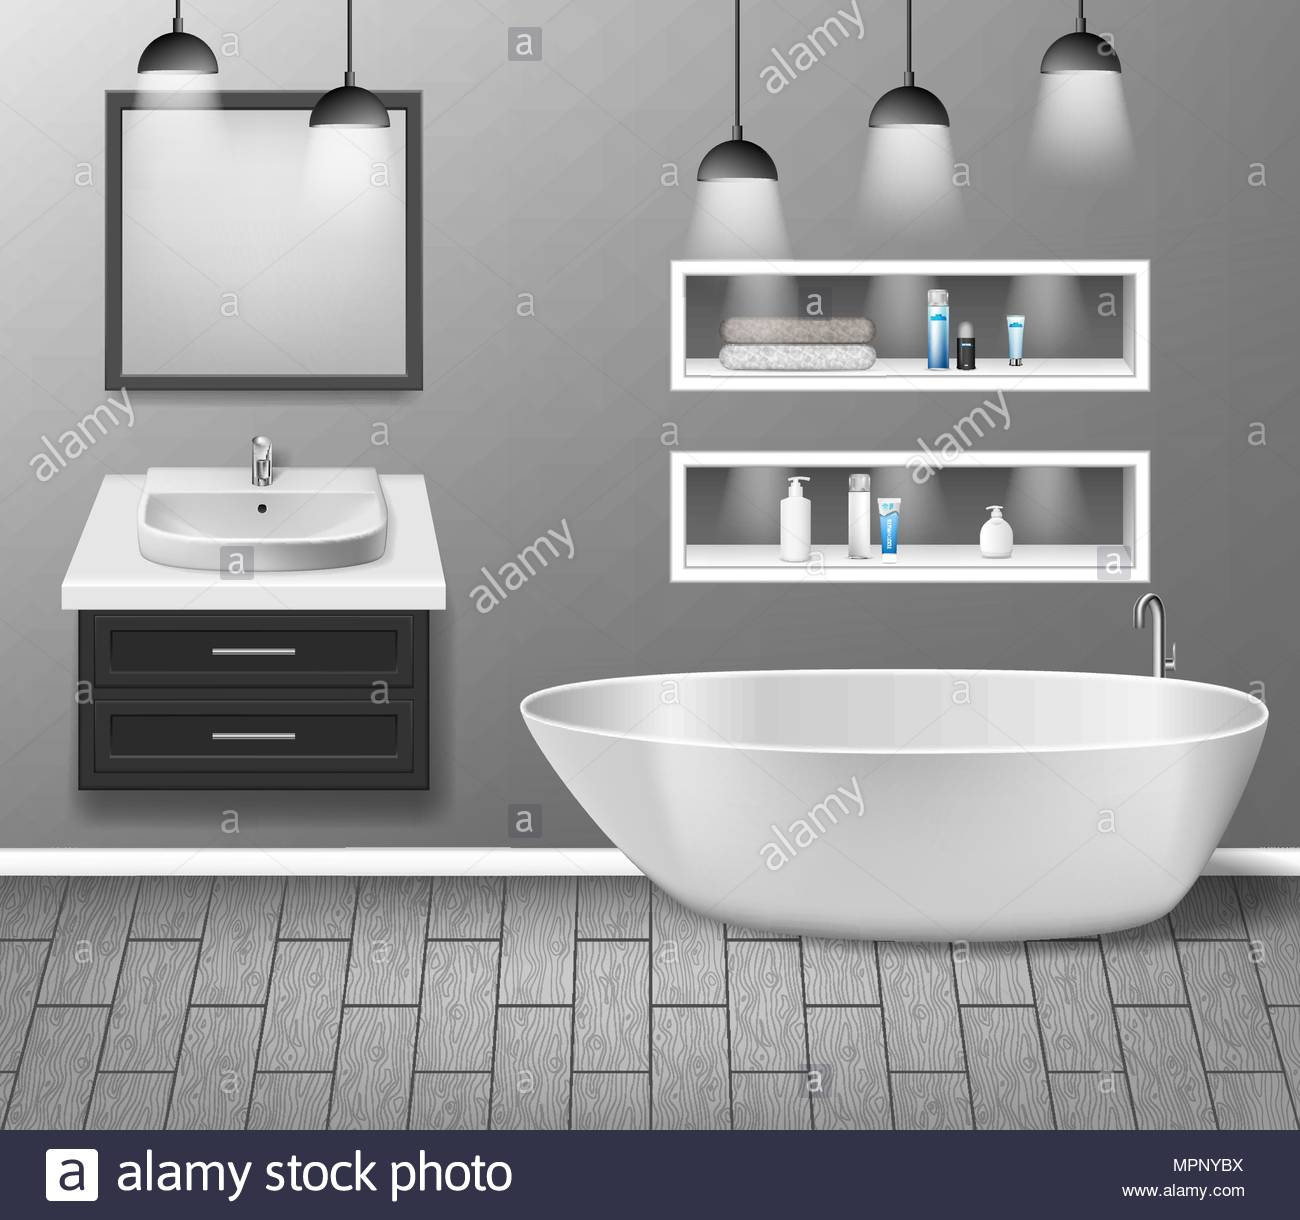 Realistic Bathroom Furniture Interior With Modern Bathroom Sink pertaining to sizing 1300 X 1220